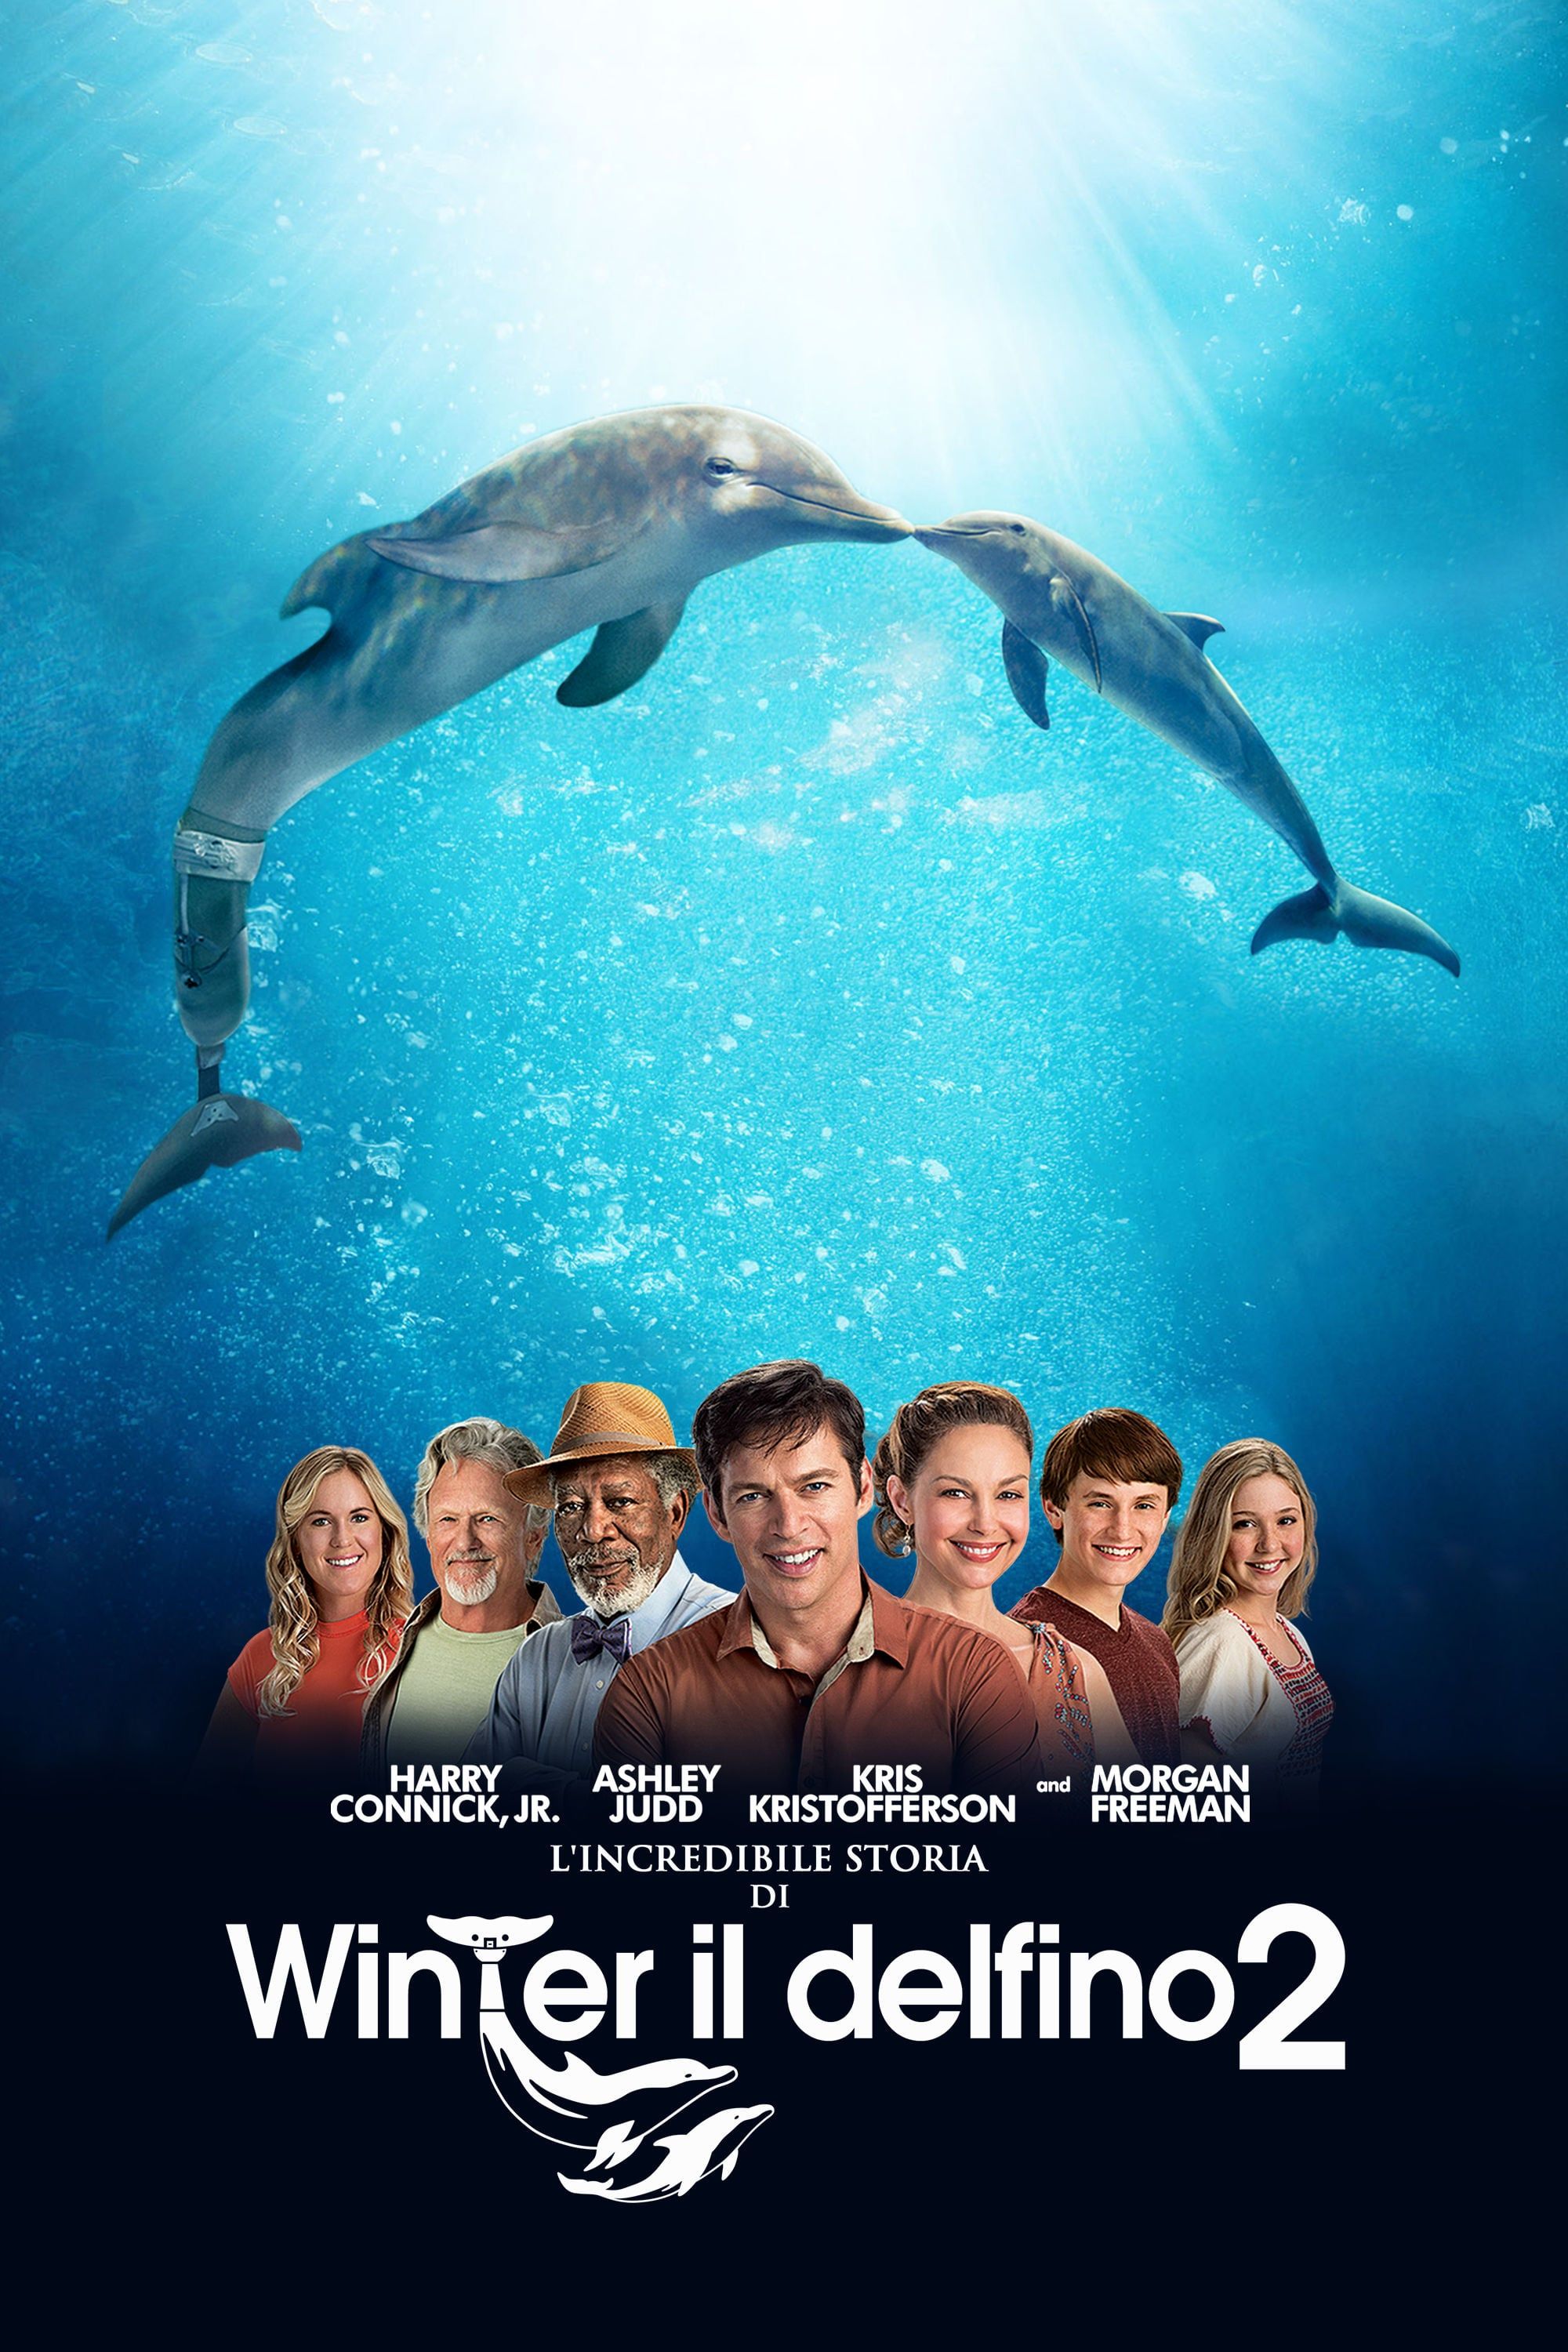 dolphin tale cast